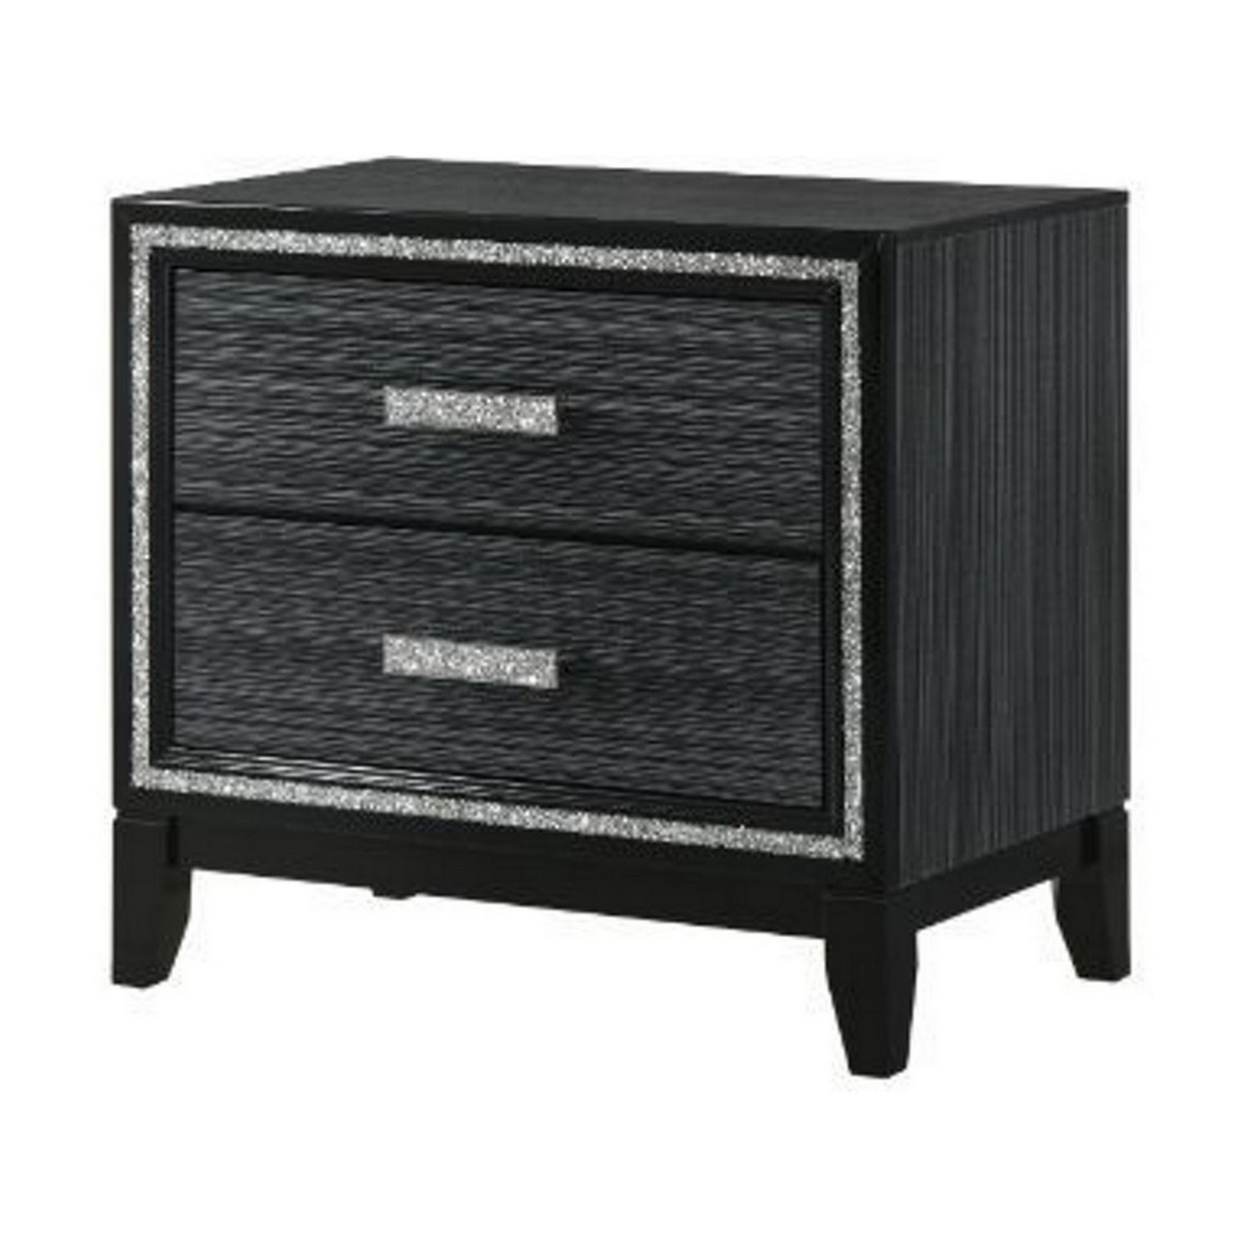 Nightstand With 2 Drawers And Shimmery Details, Black- Saltoro Sherpi